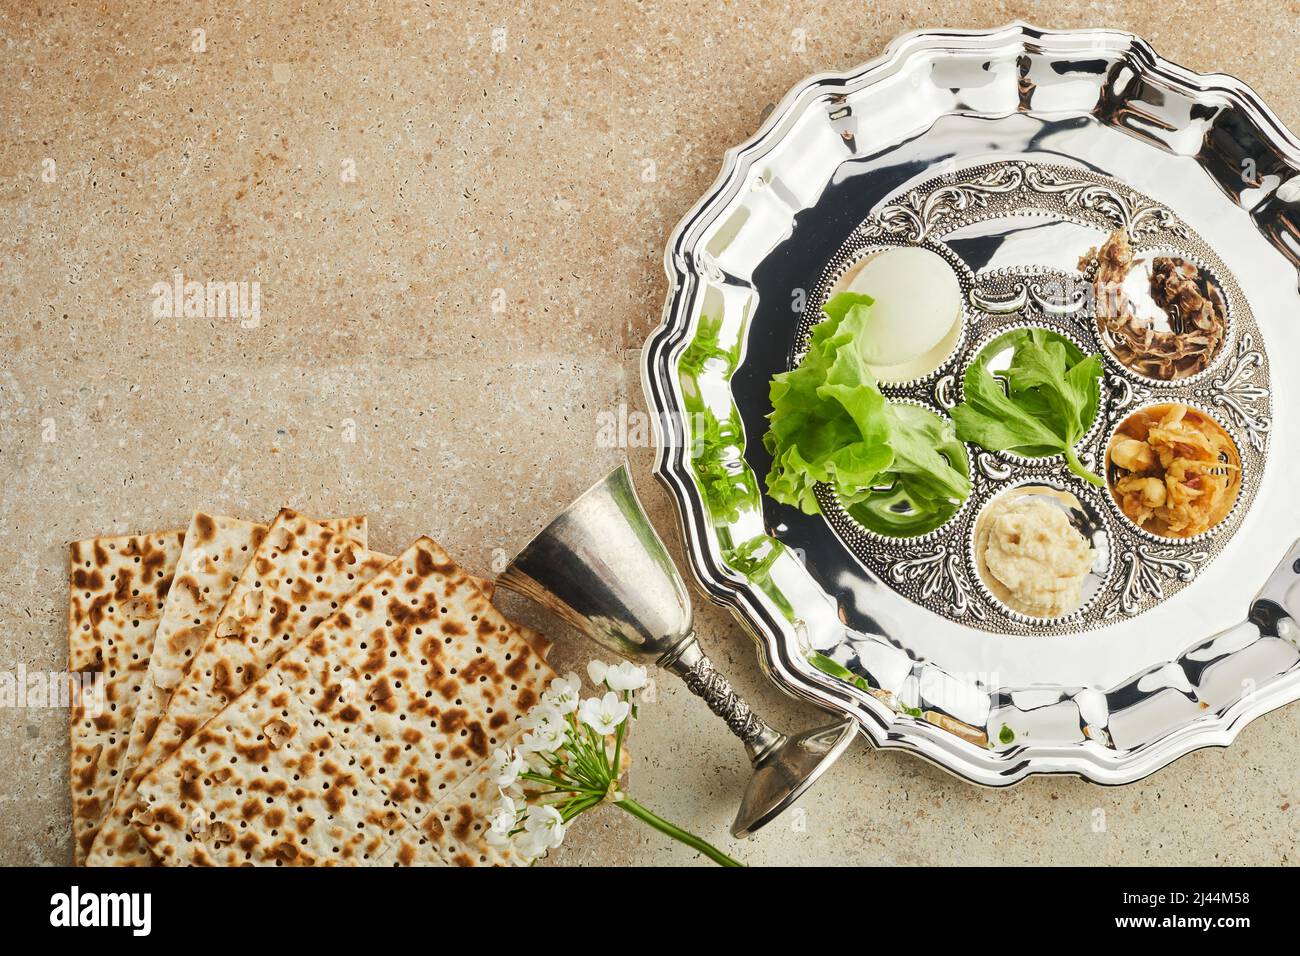 Passover Seder plate with traditional food ontravertine stone background Stock Photo